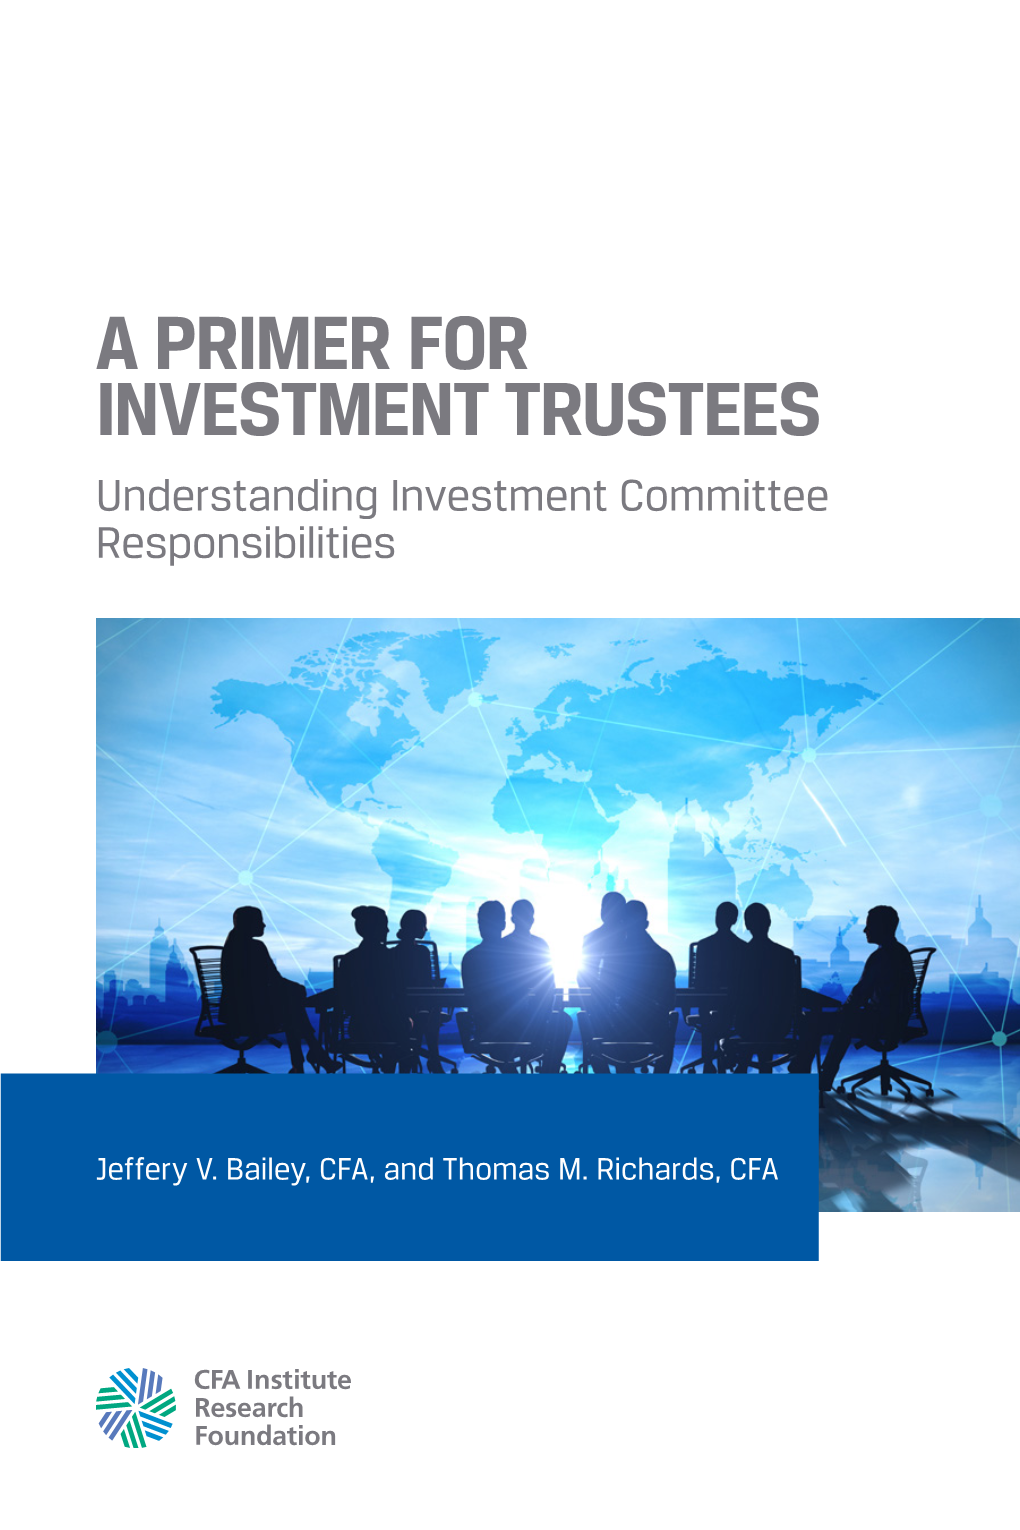 A PRIMER for INVESTMENT TRUSTEES Understanding Investment Committee Responsibilities a PRIMER for INVESTMENT TRUSTEES INVESTMENT for a PRIMER